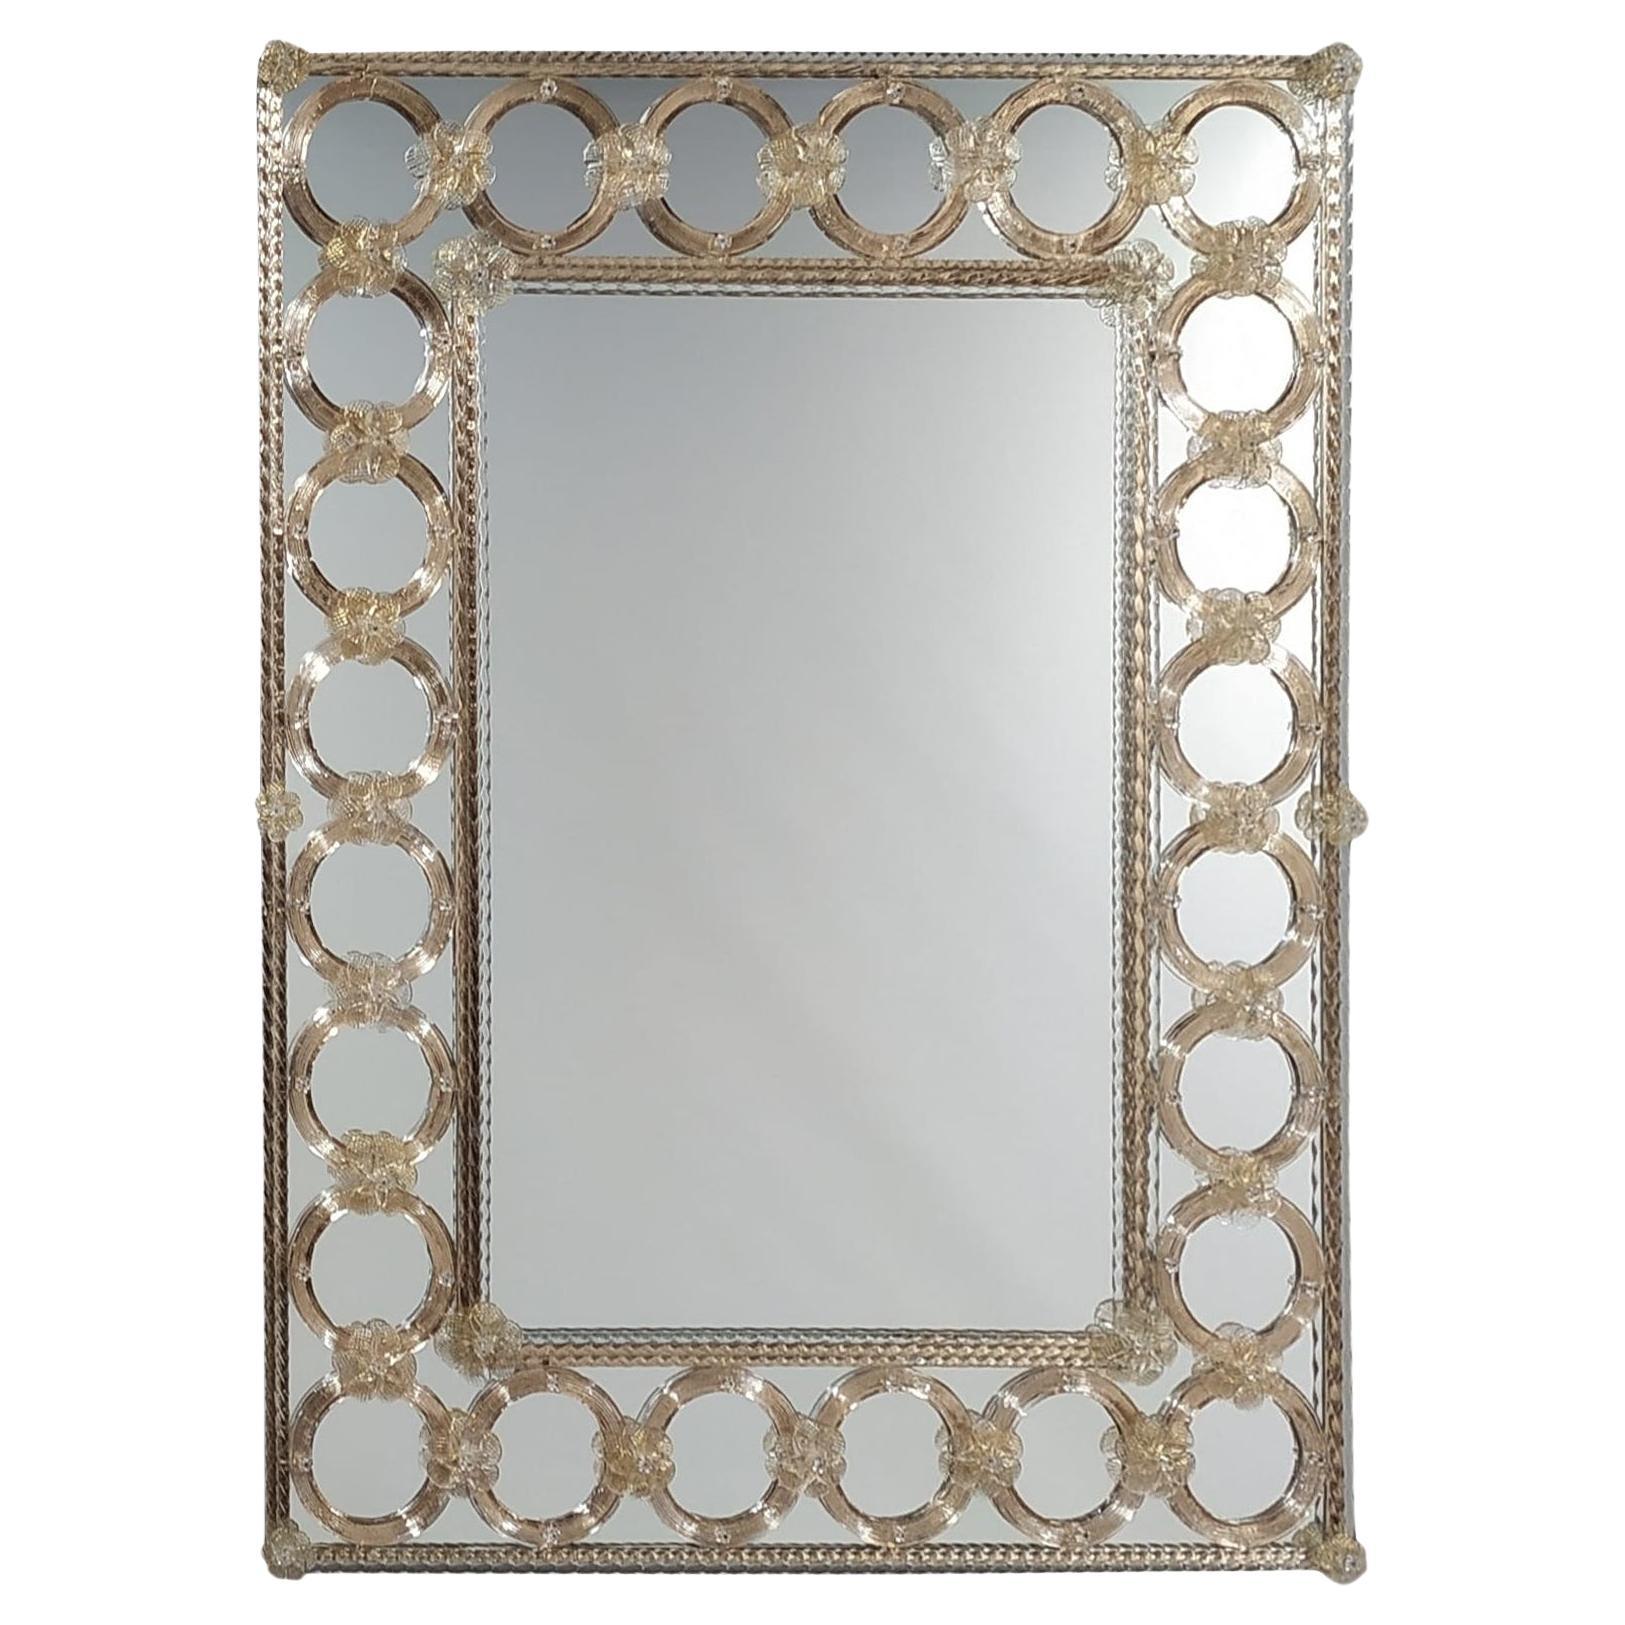 "Mamaro" Murano Glass Mirror in Venetian Style by Fratelli Tosi, Made in Italy For Sale